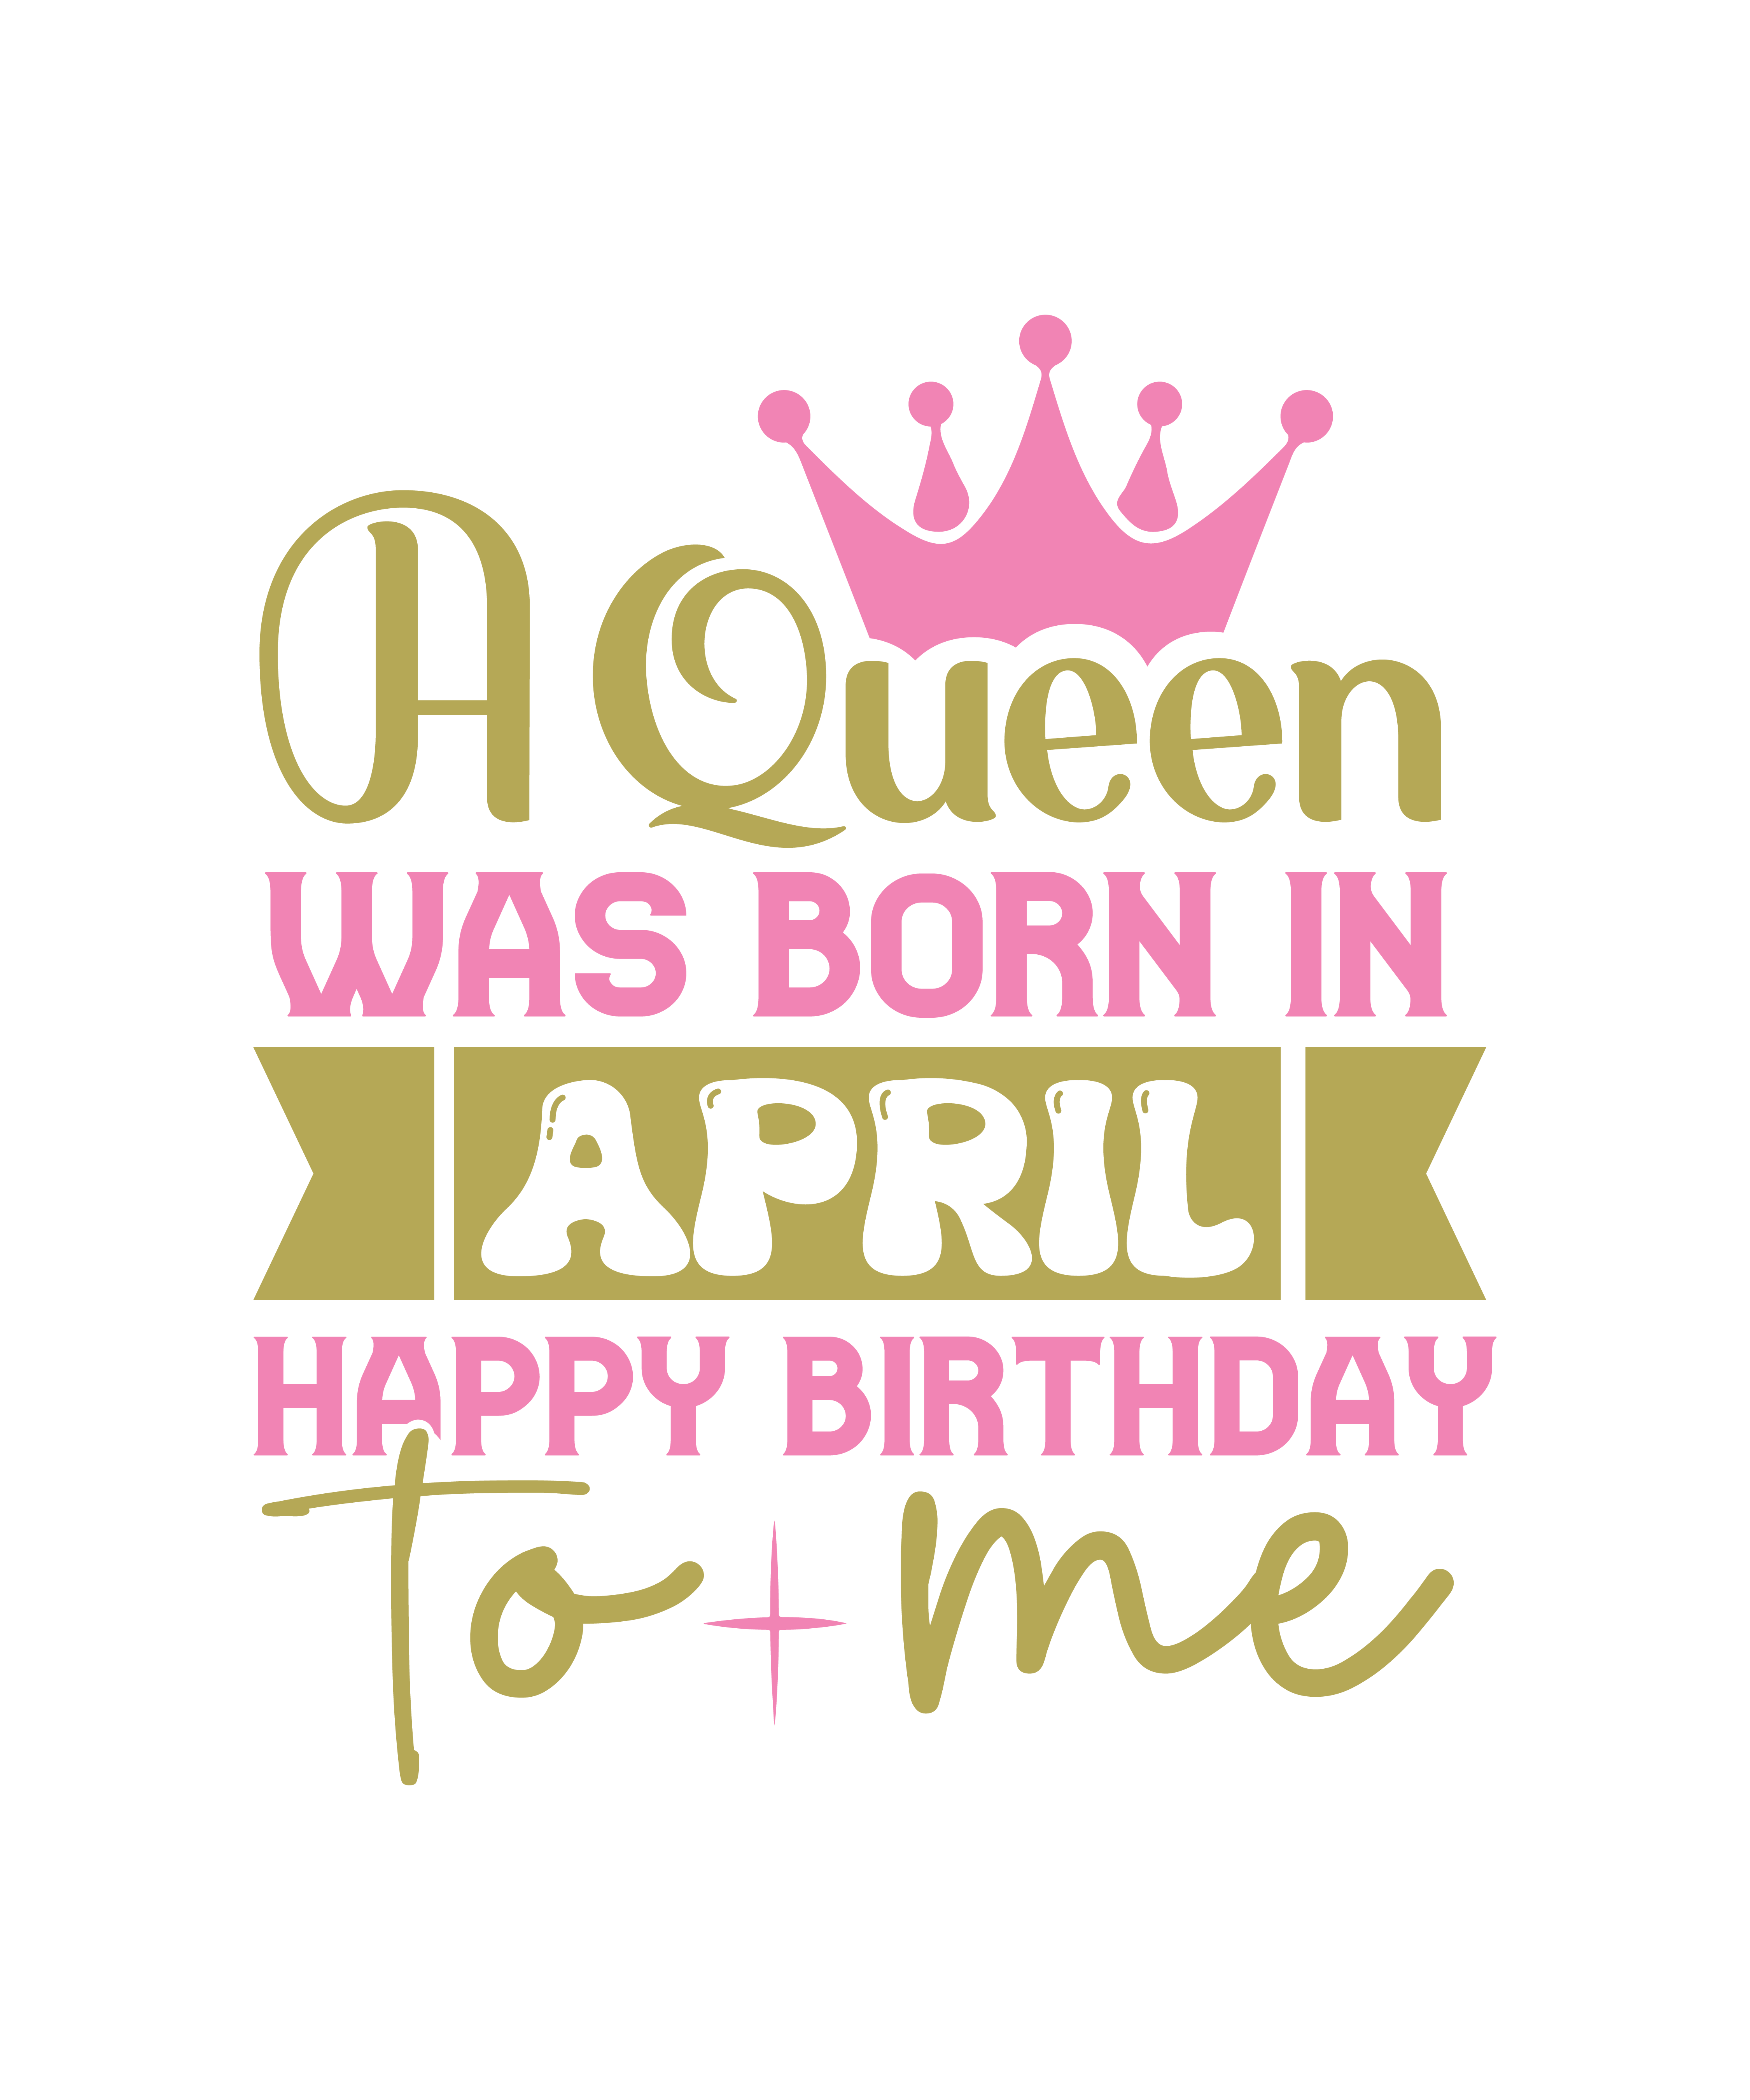 a queen was born in april happy birthday to me 01 980